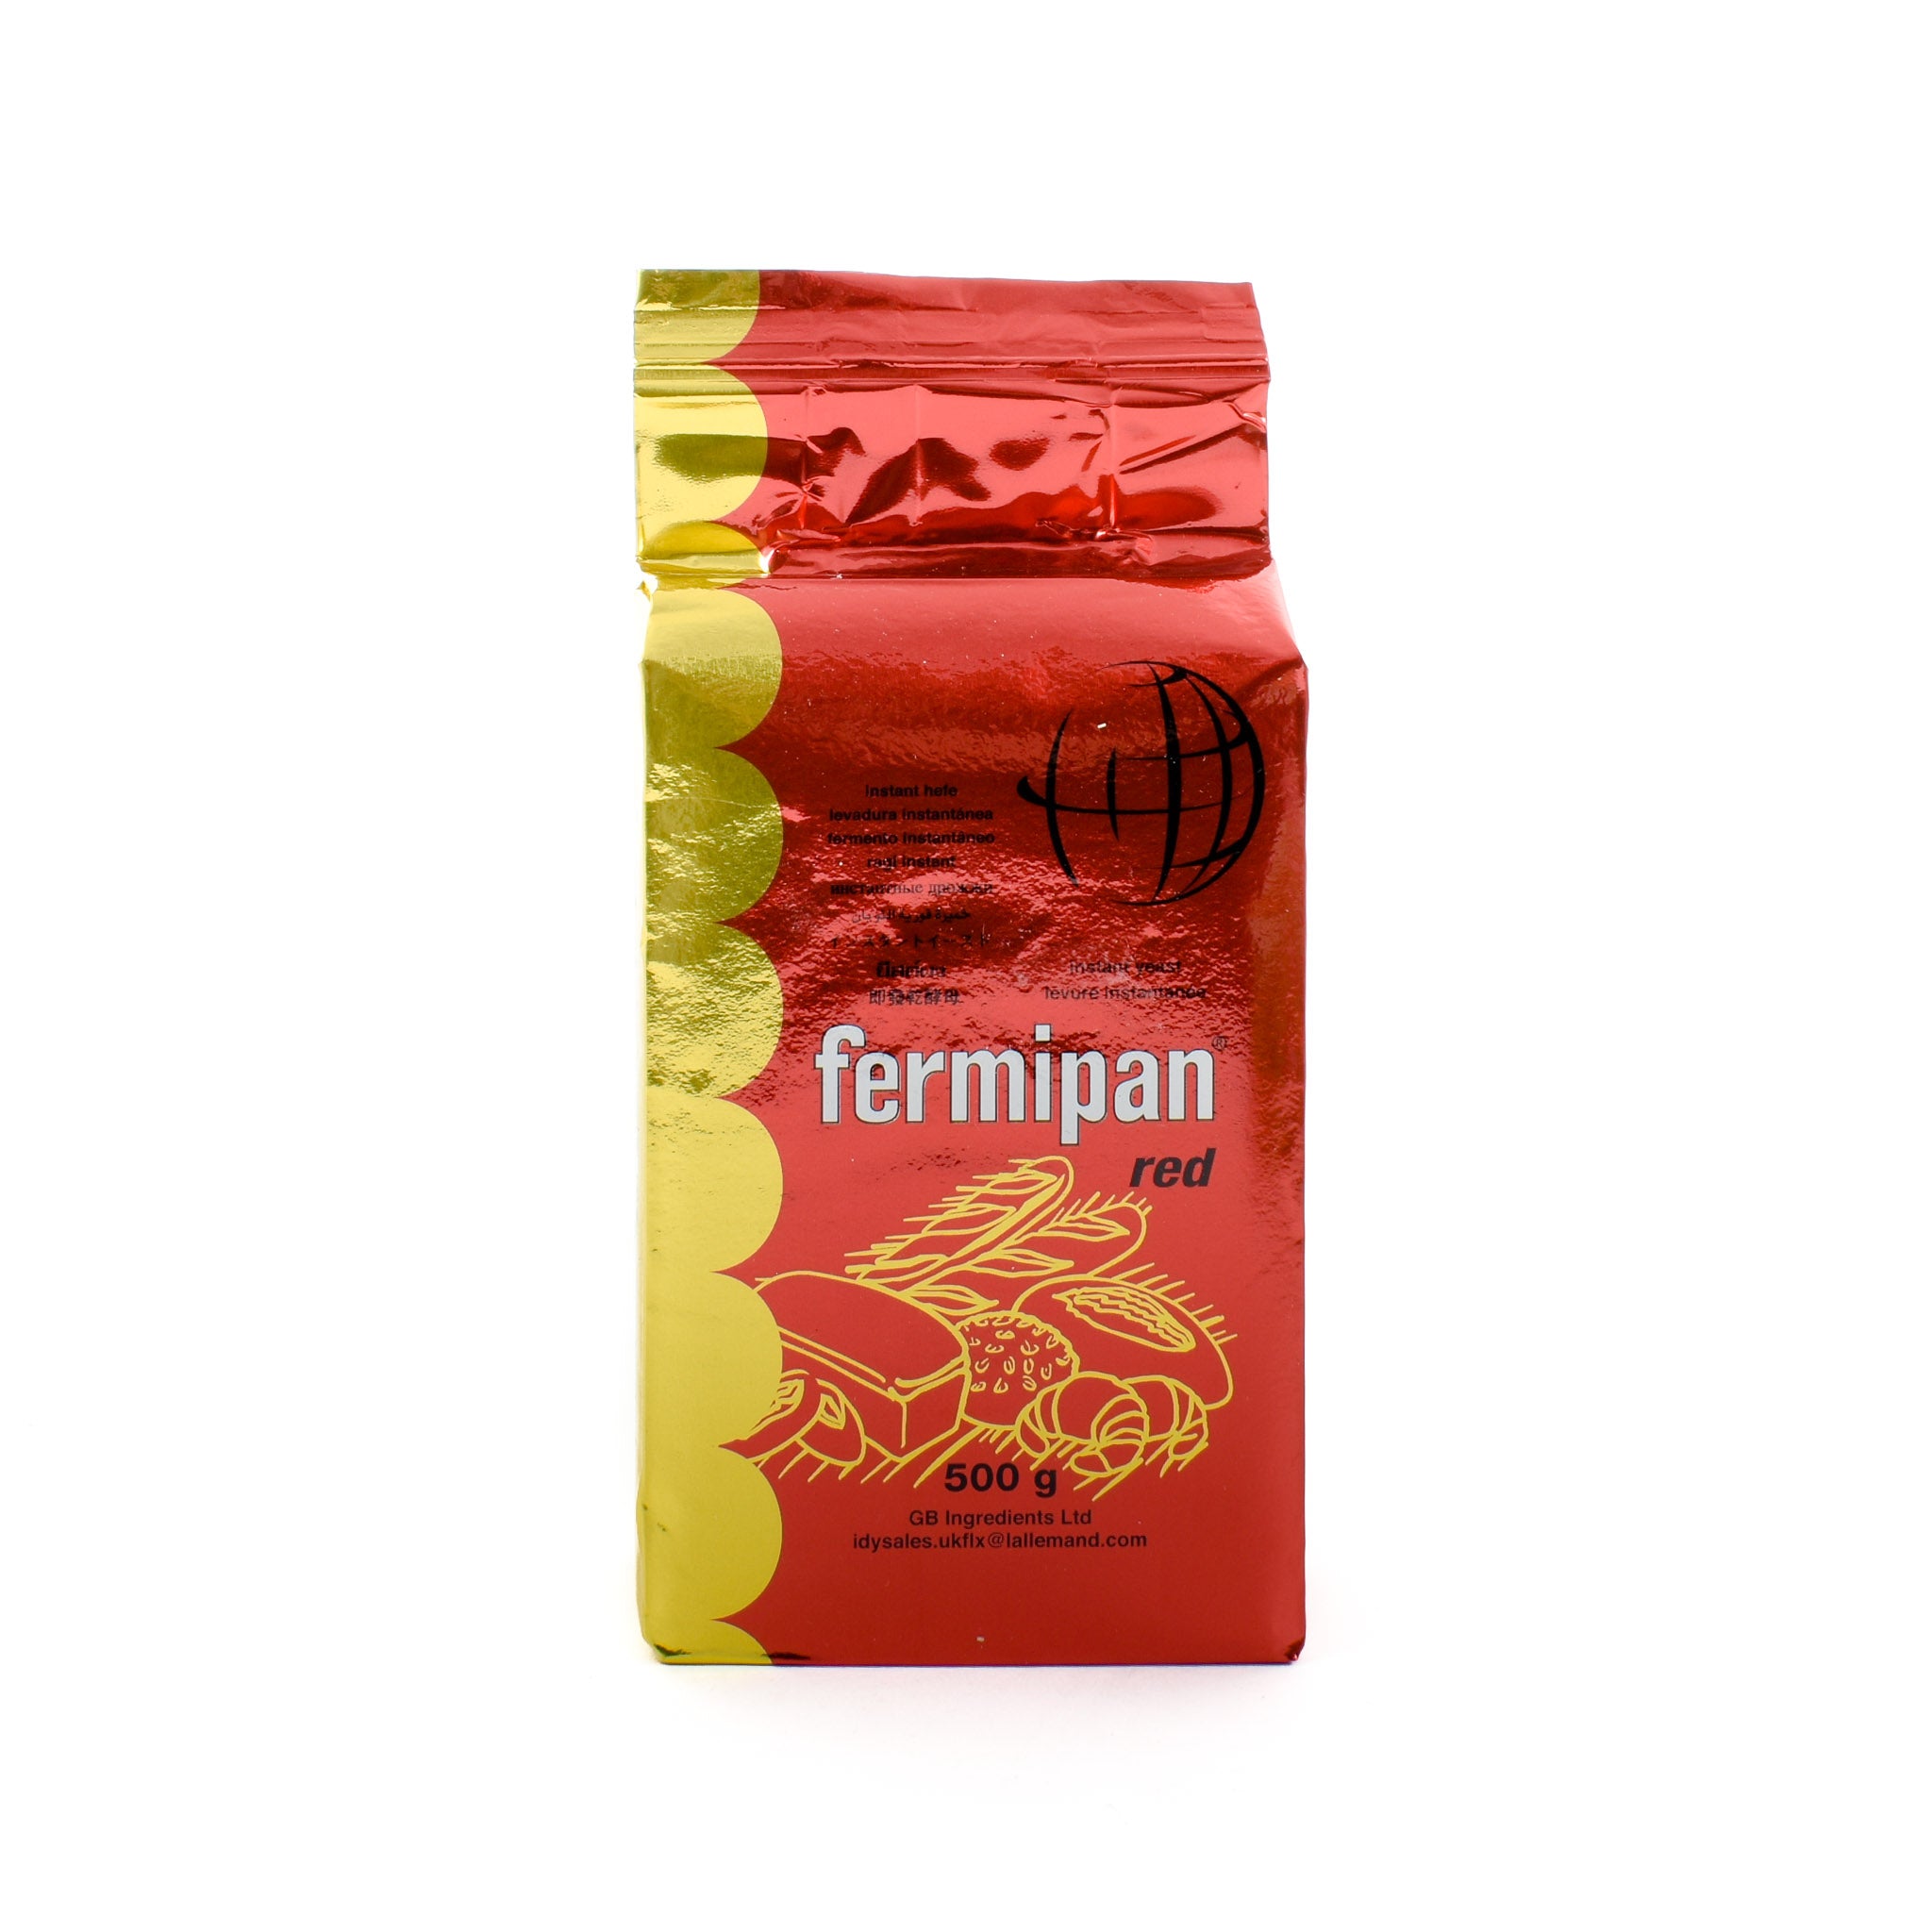 Fermipan Red Dried Yeast 500g